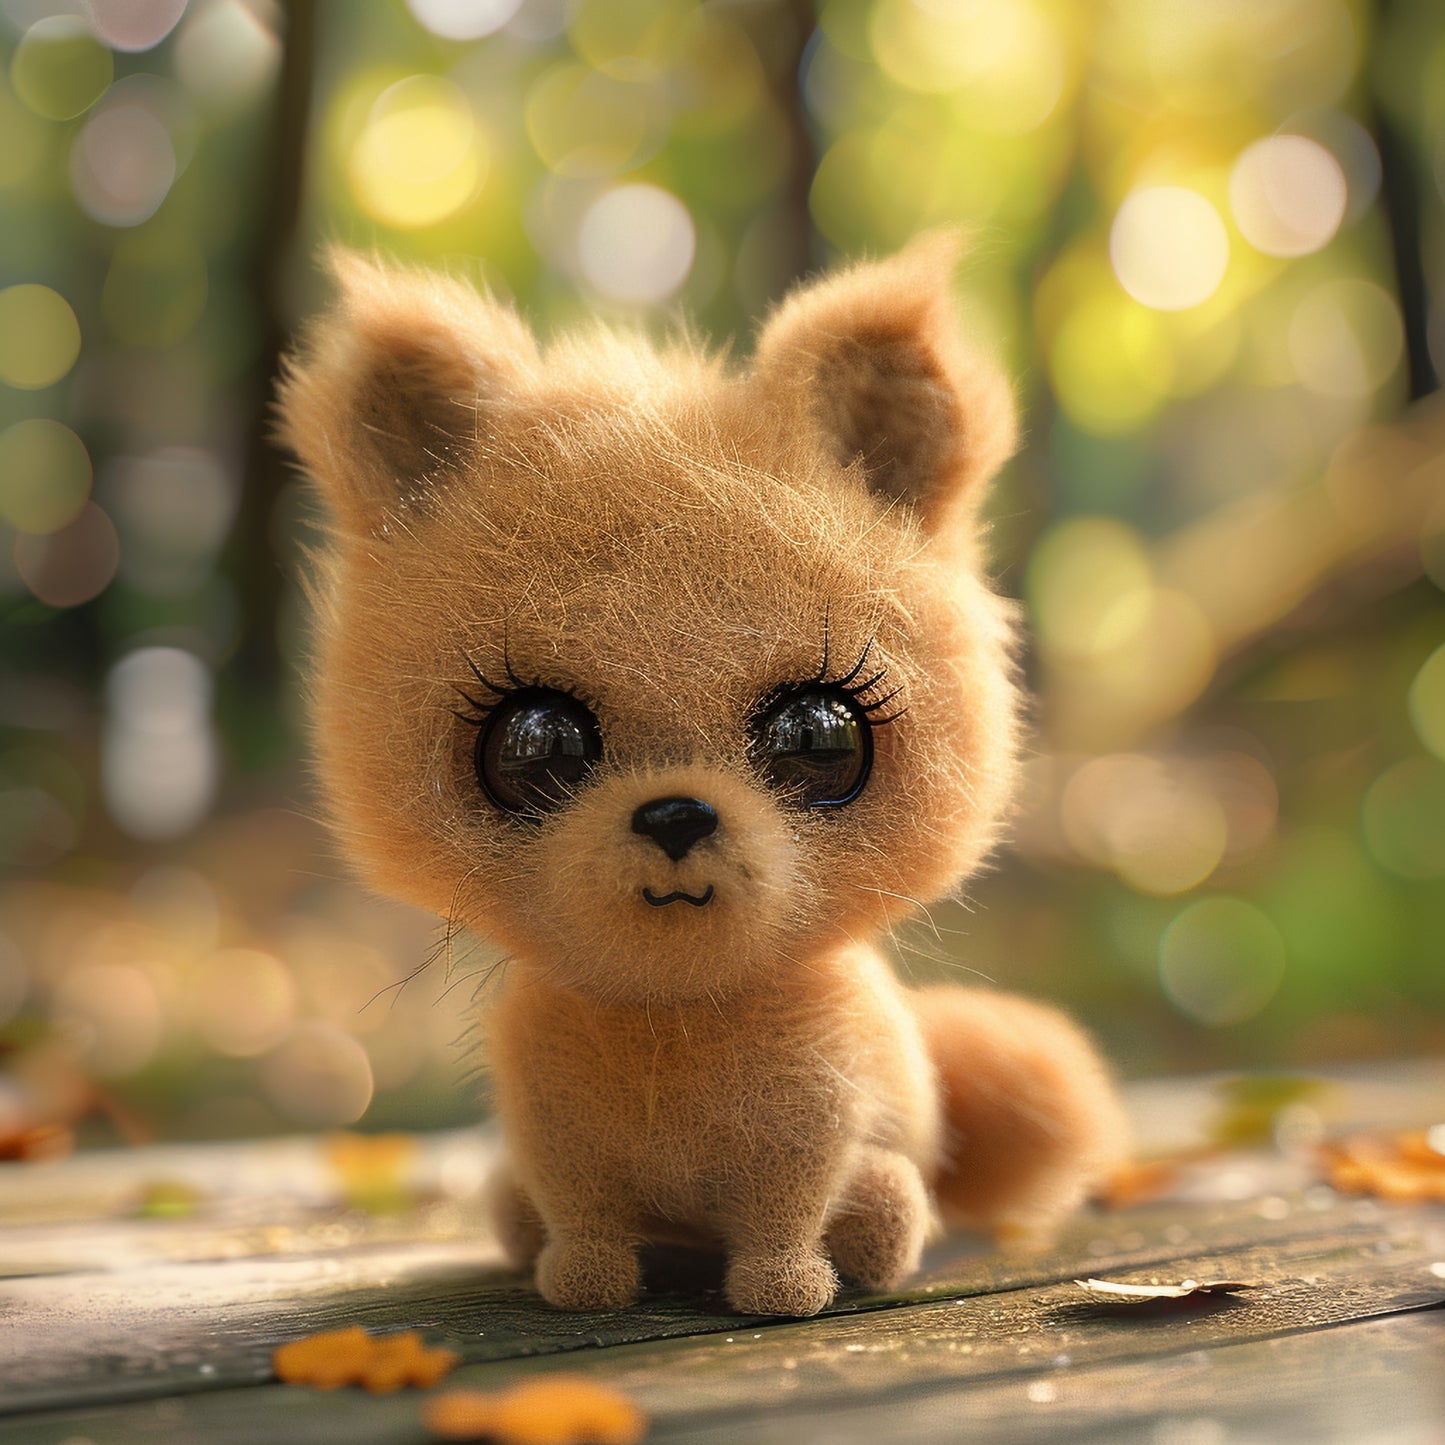 Adorable Fluffy Felted Toy Dog with Big Eyes in Nature